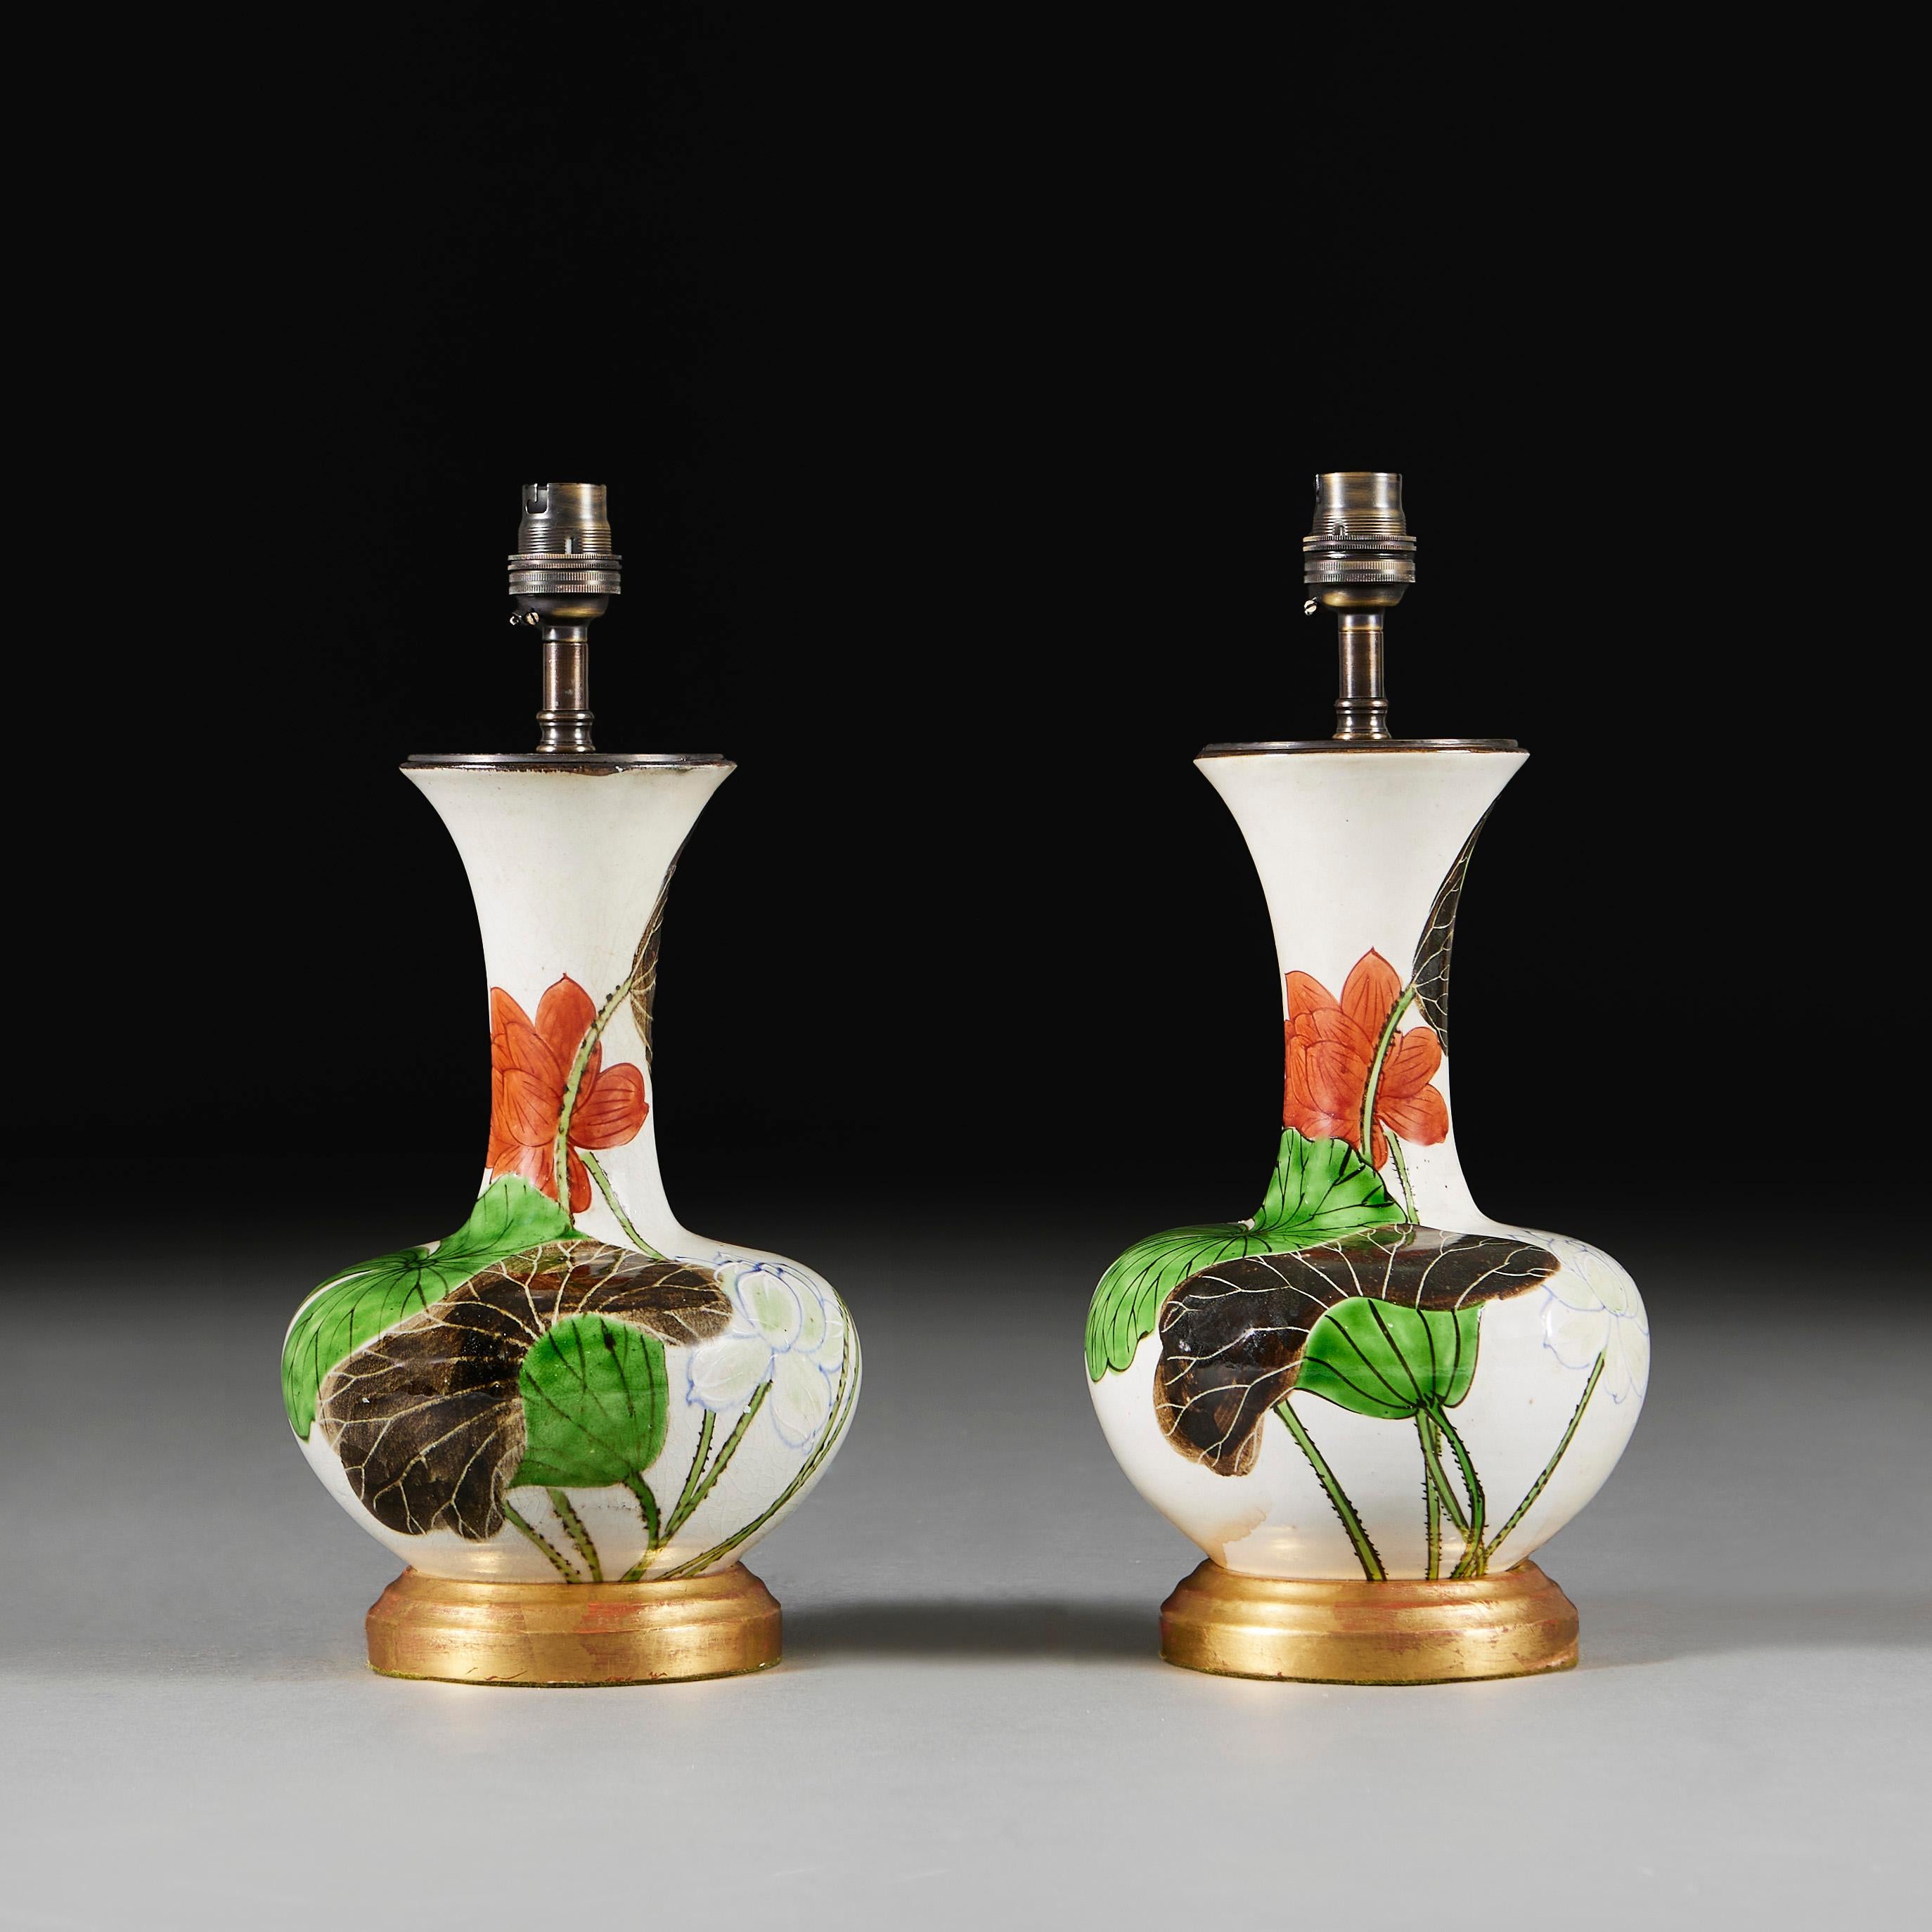 Glazed Pair of Late 19th Century Japanese Vases as Lamps, White, Green, Giltwood Bases